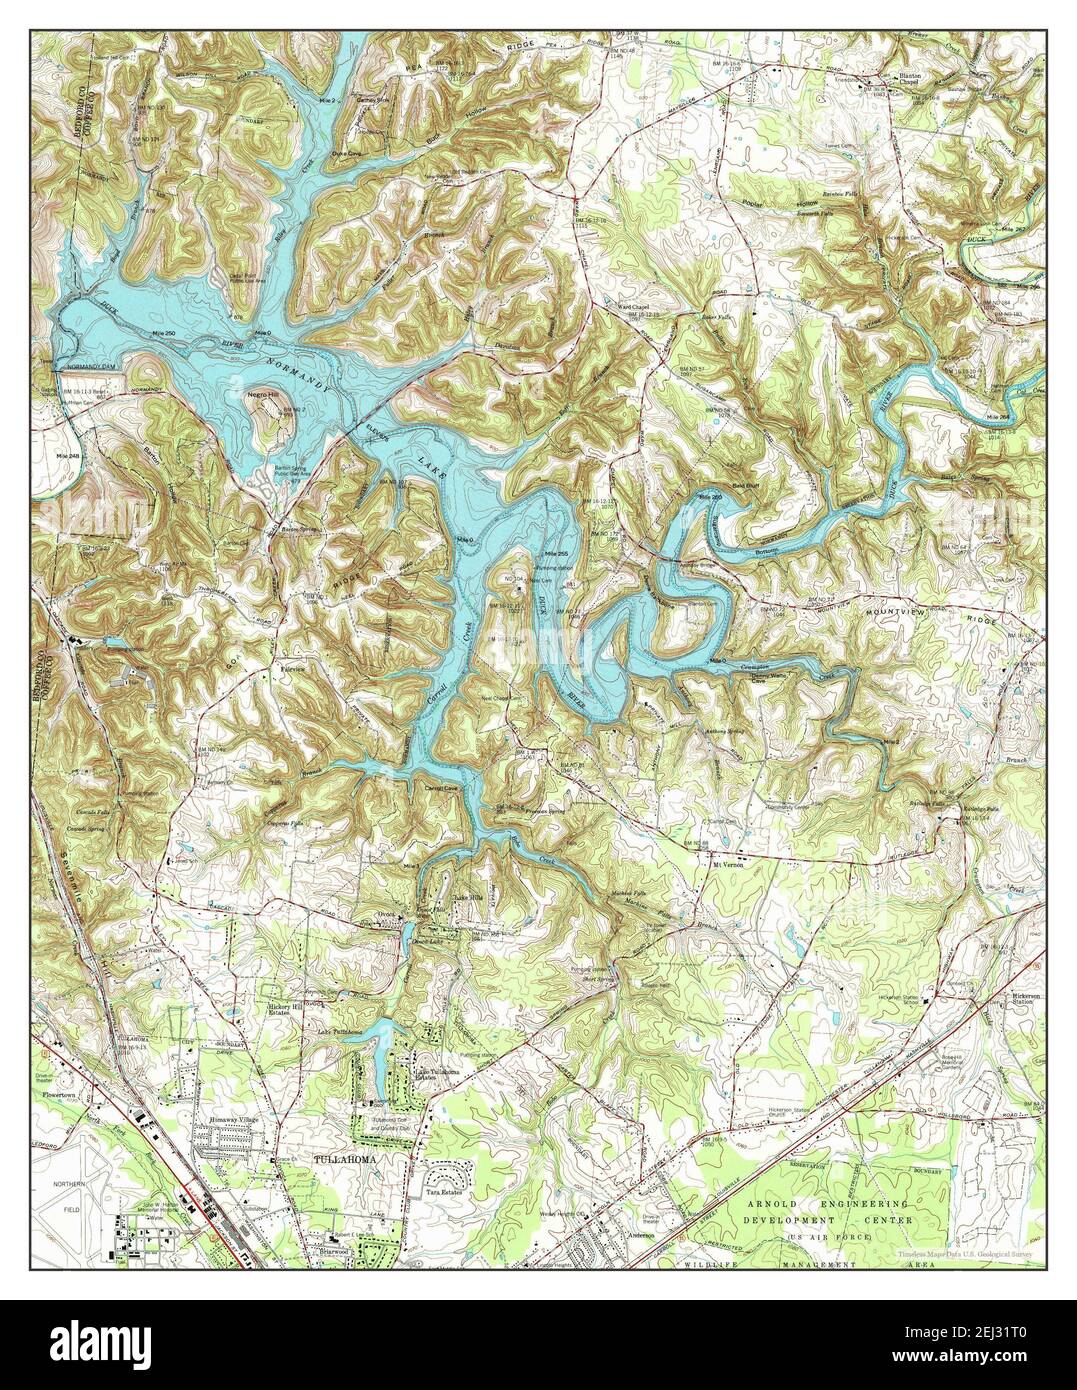 Normandy Lake, Tennessee, map 1976, 1:24000, United States of America by Timeless Maps, data U.S. Geological Survey Stock Photo